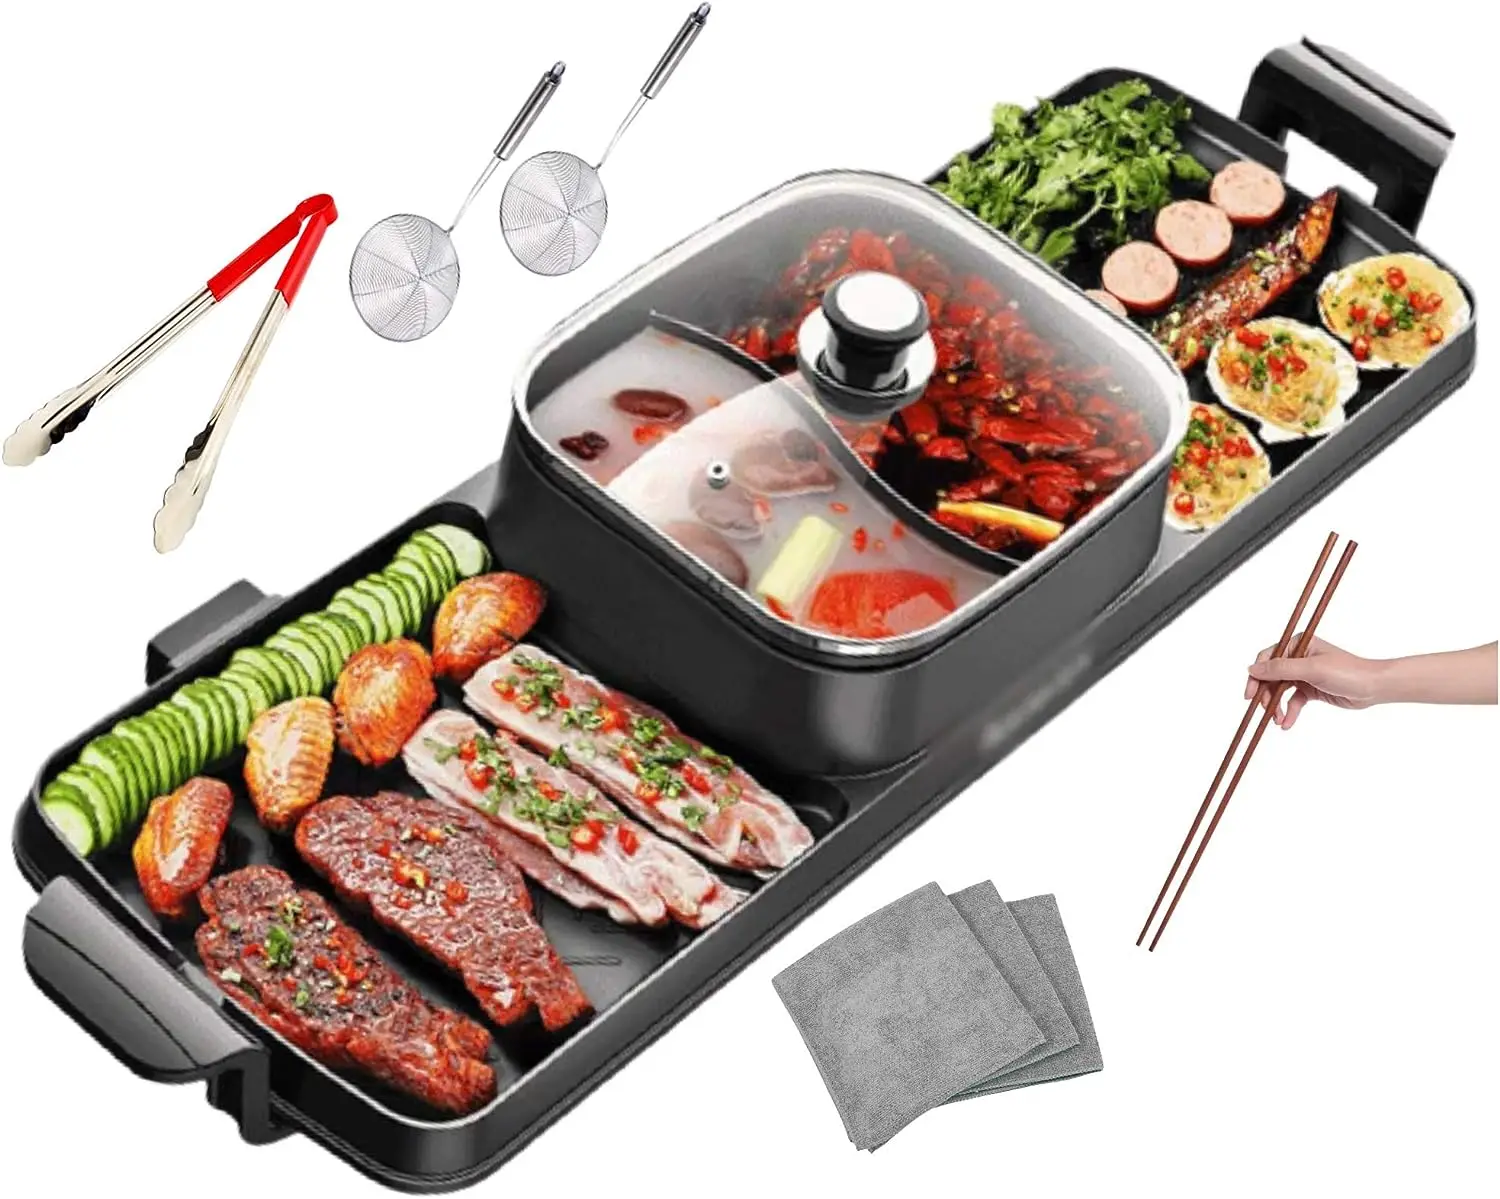 https://ae01.alicdn.com/kf/Sc18e12d7939c4113bd6e896faba6026c9/Hotpot-Grill-Combo-Indoor-Korean-BBQ-Shabu-Shabu-Hot-Pot-with-Divider-Portable-with-Free-Strainer.jpg